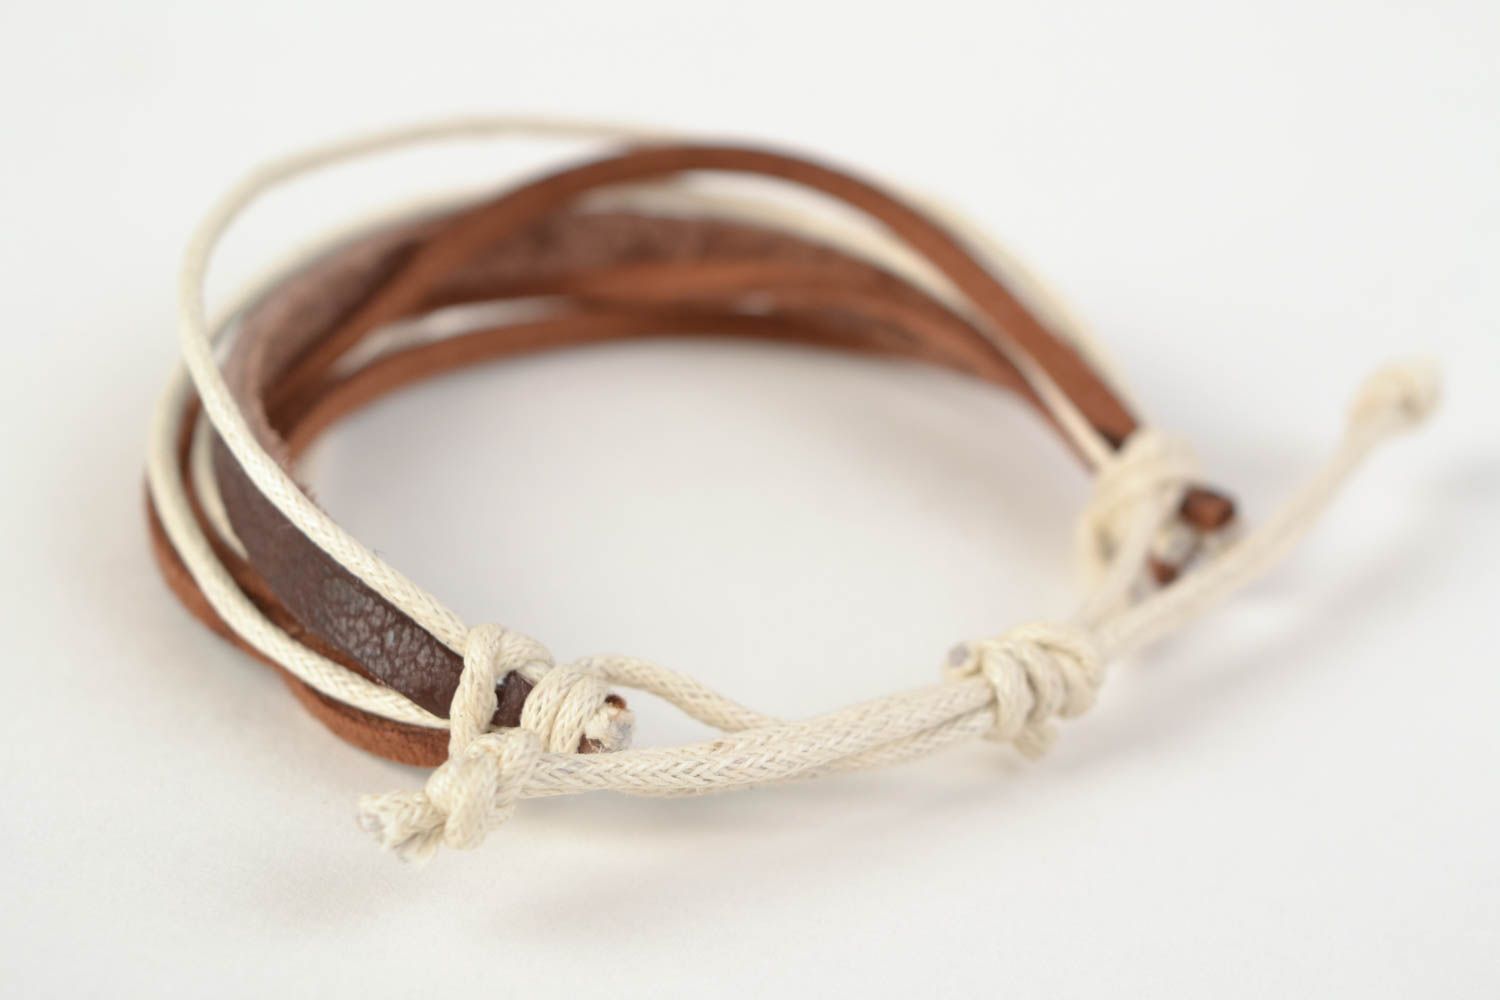 Handmade genuine leather and suede cords wrist bracelet in brown color palette photo 4